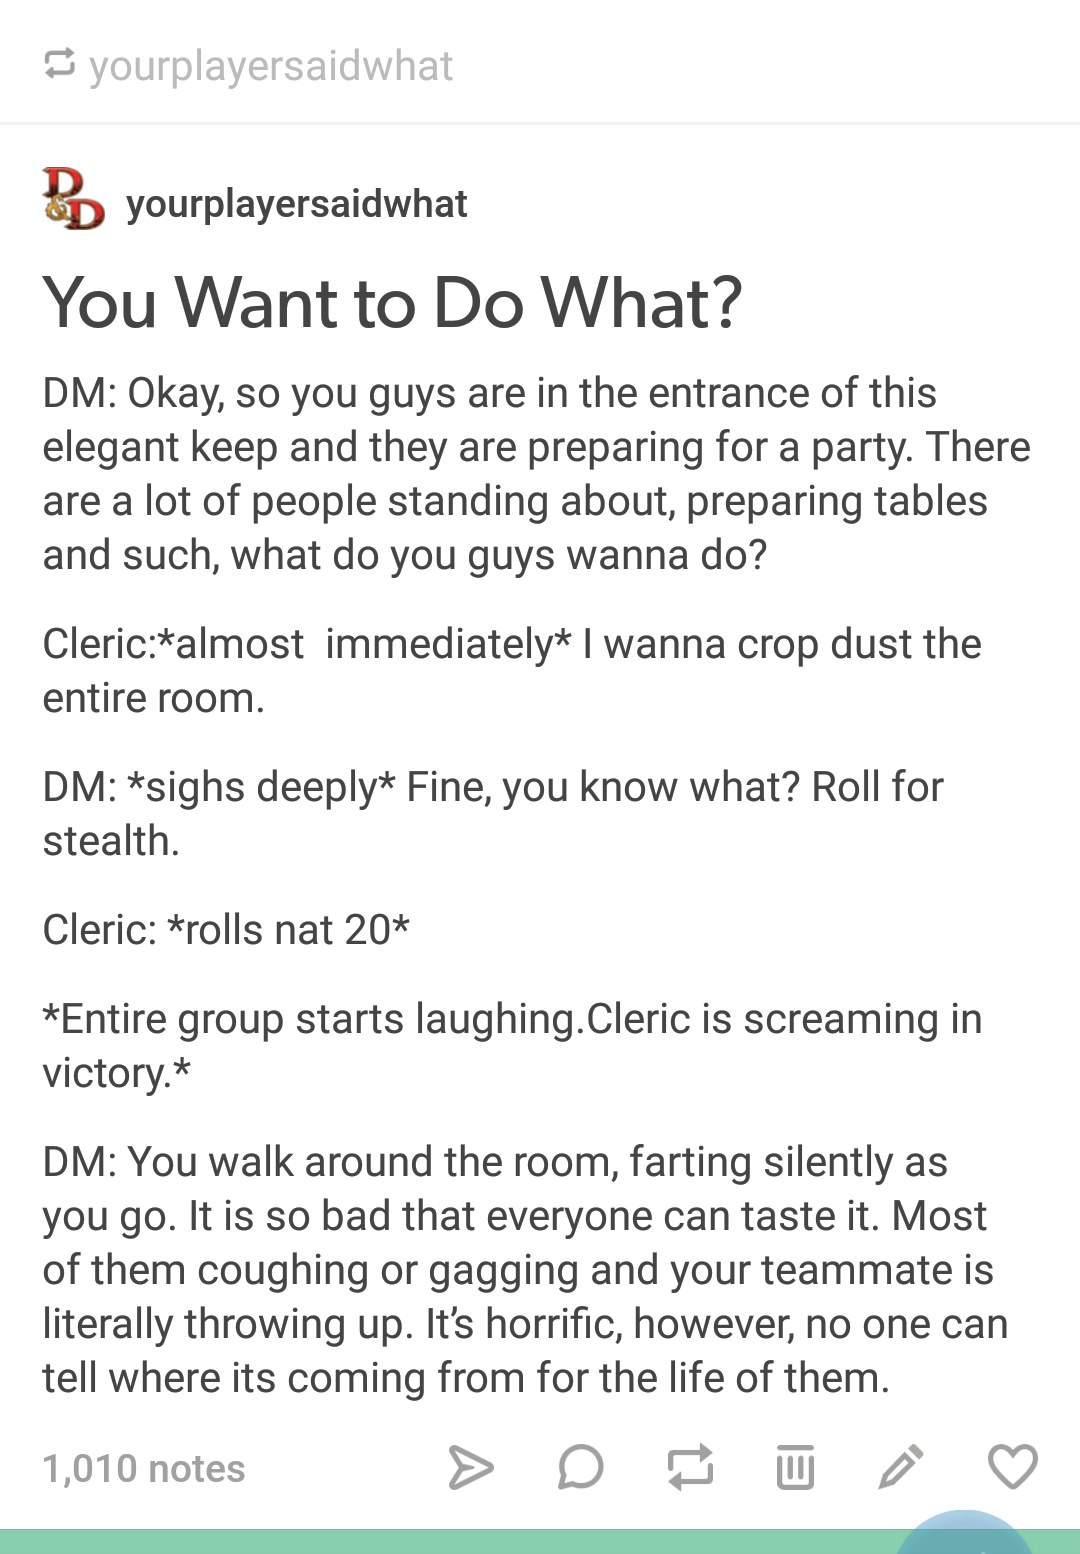 dnd notes meme - yourplayersaidwhat Bd yourplayersaidwhat You Want to Do What? Dm Okay, so you guys are in the entrance of this elegant keep and they are preparing for a party. There are a lot of people standing about, preparing tables and such, what do y